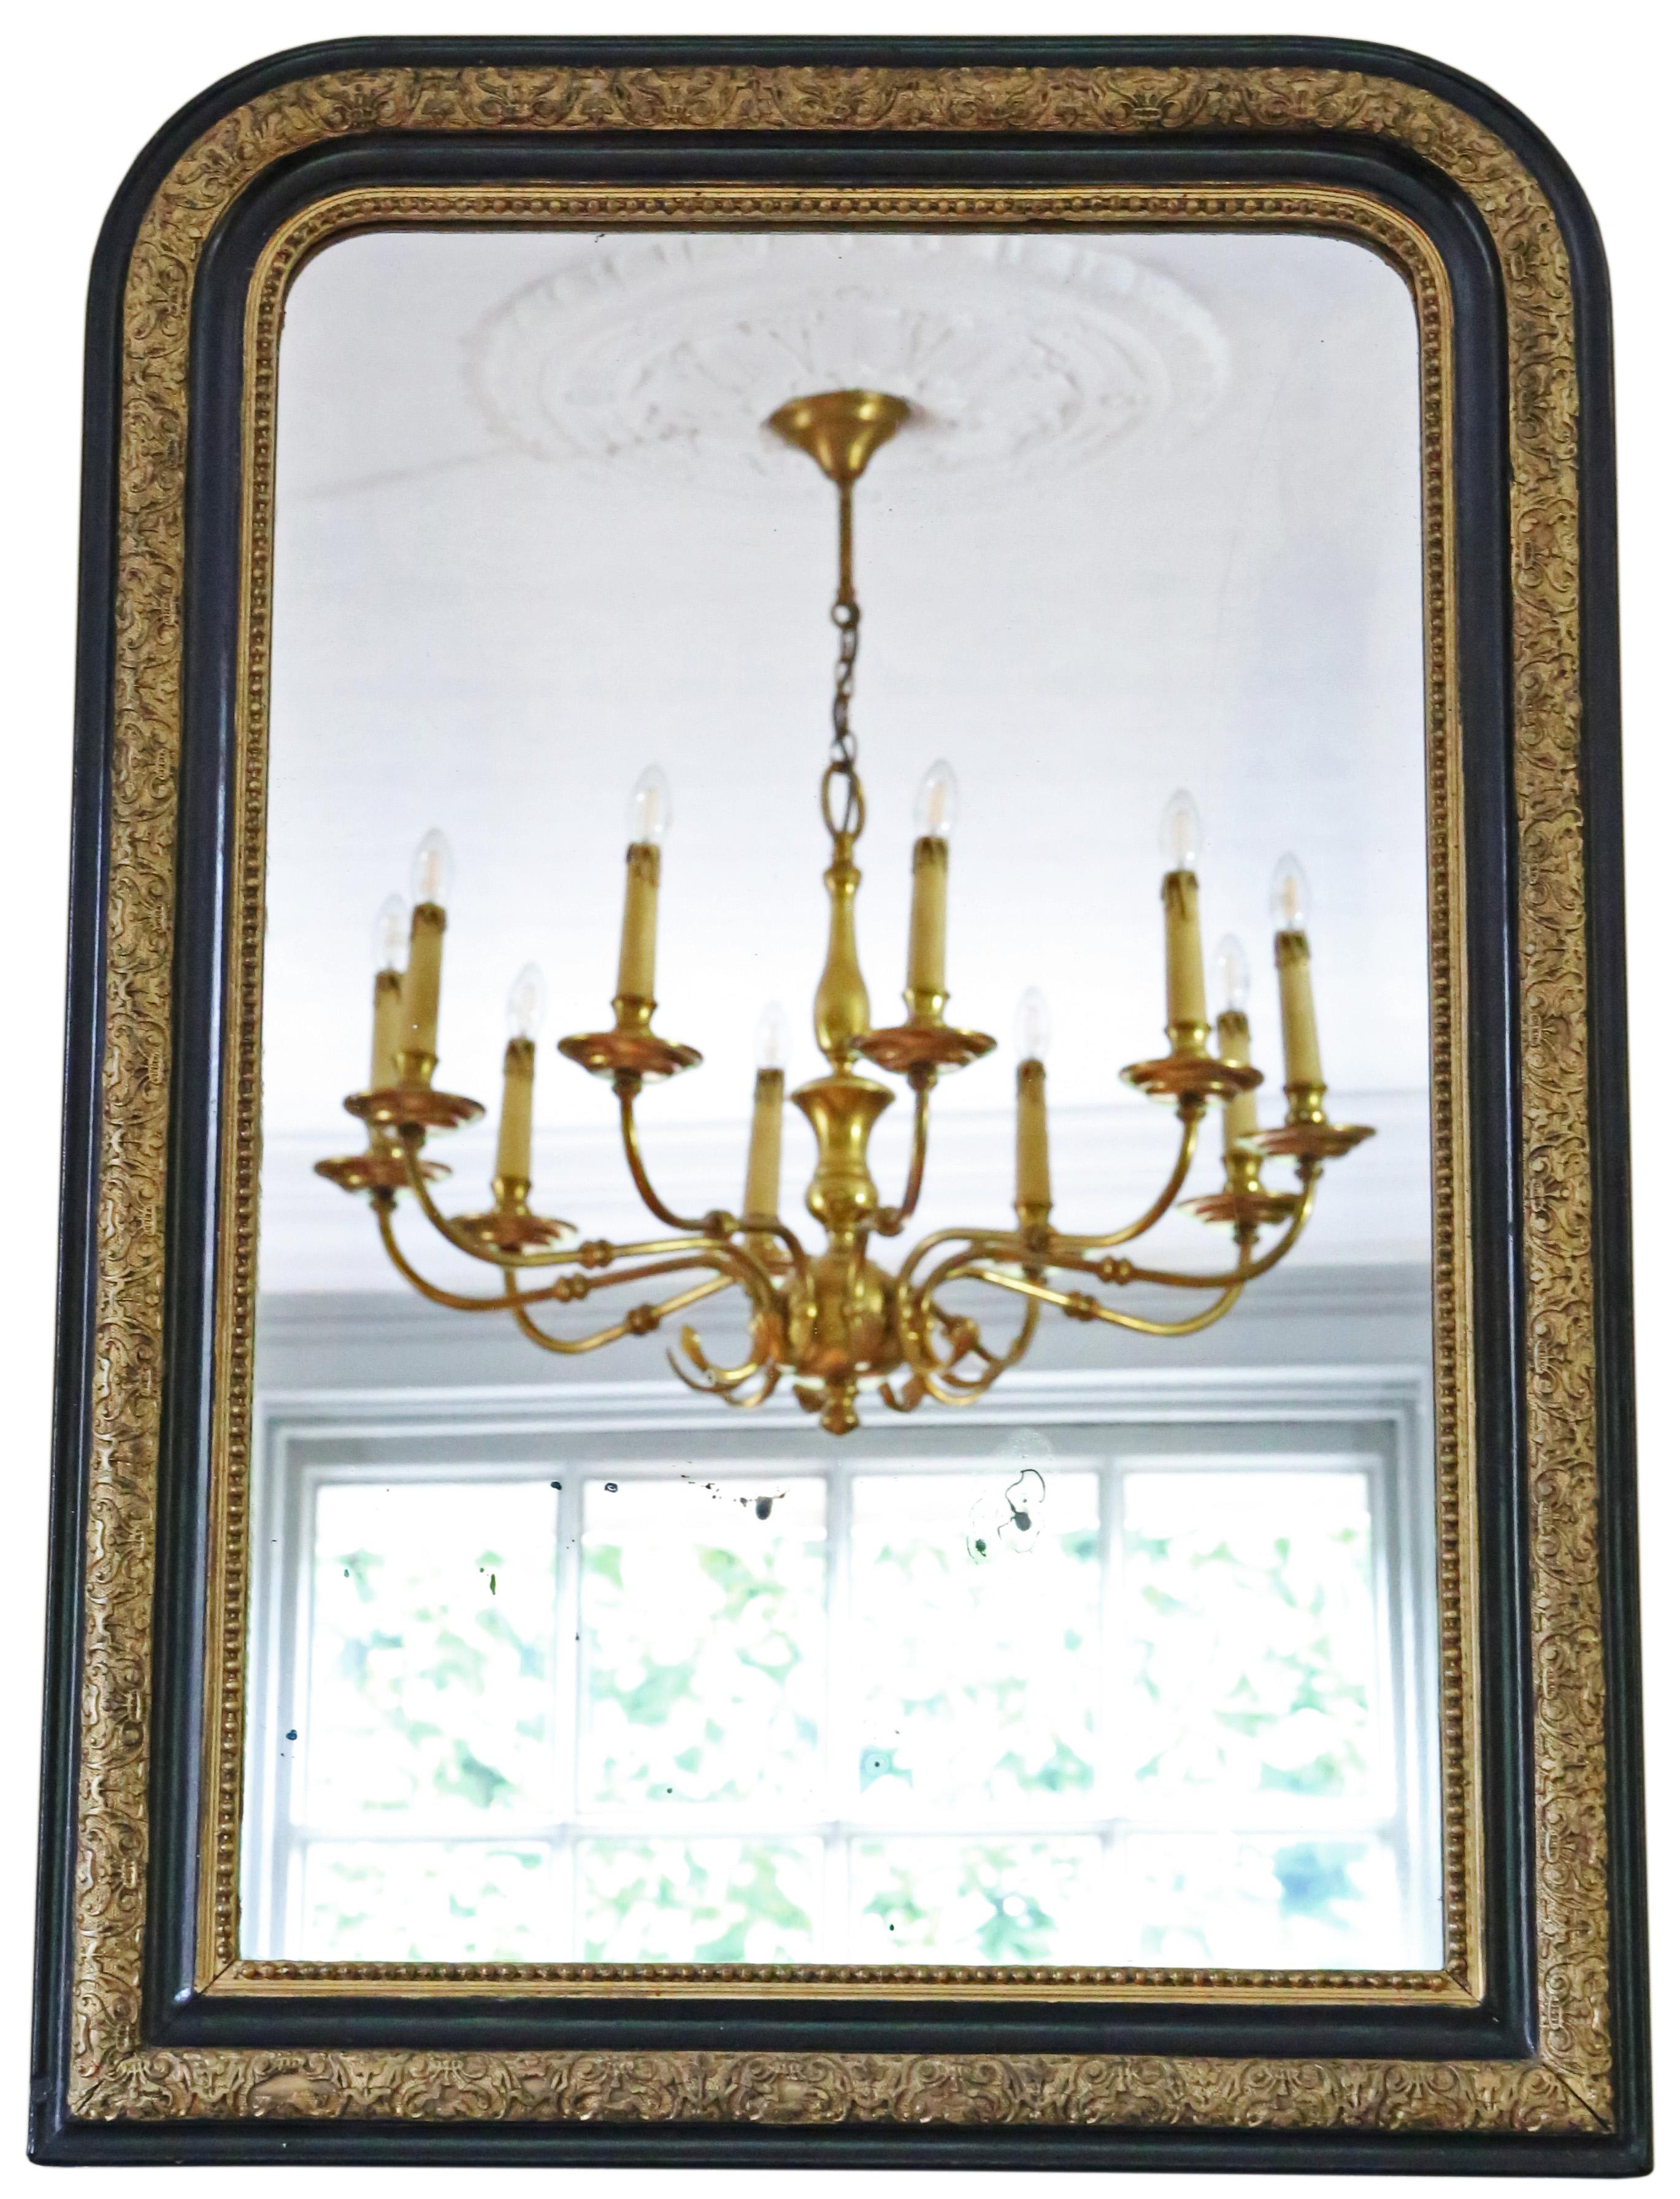 Impressive 19th Century ebonised and gilt overmantle wall mirror of superior quality.

This enchanting and uncommon mirror stands out as a delightful and rare discovery, providing a distinctive touch that sets it apart.

A noteworthy find, this